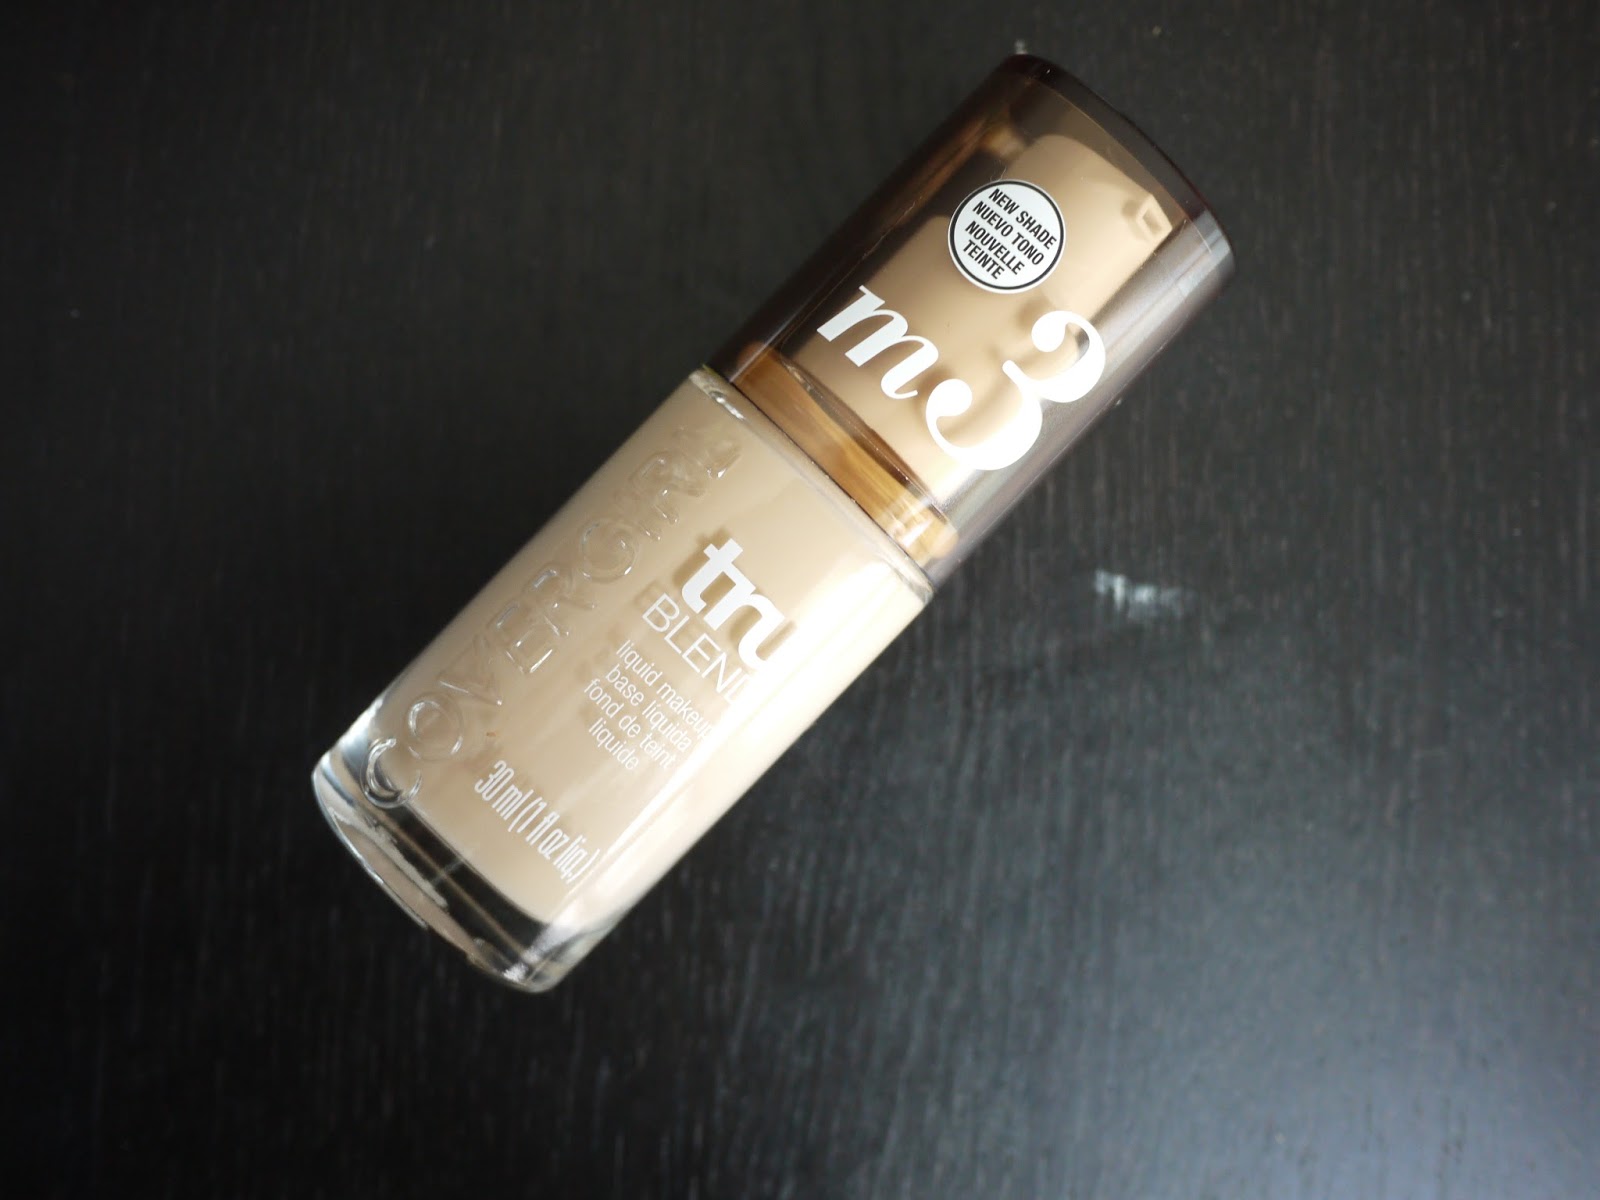 CoverGirl TruBlend Foundation M3* review